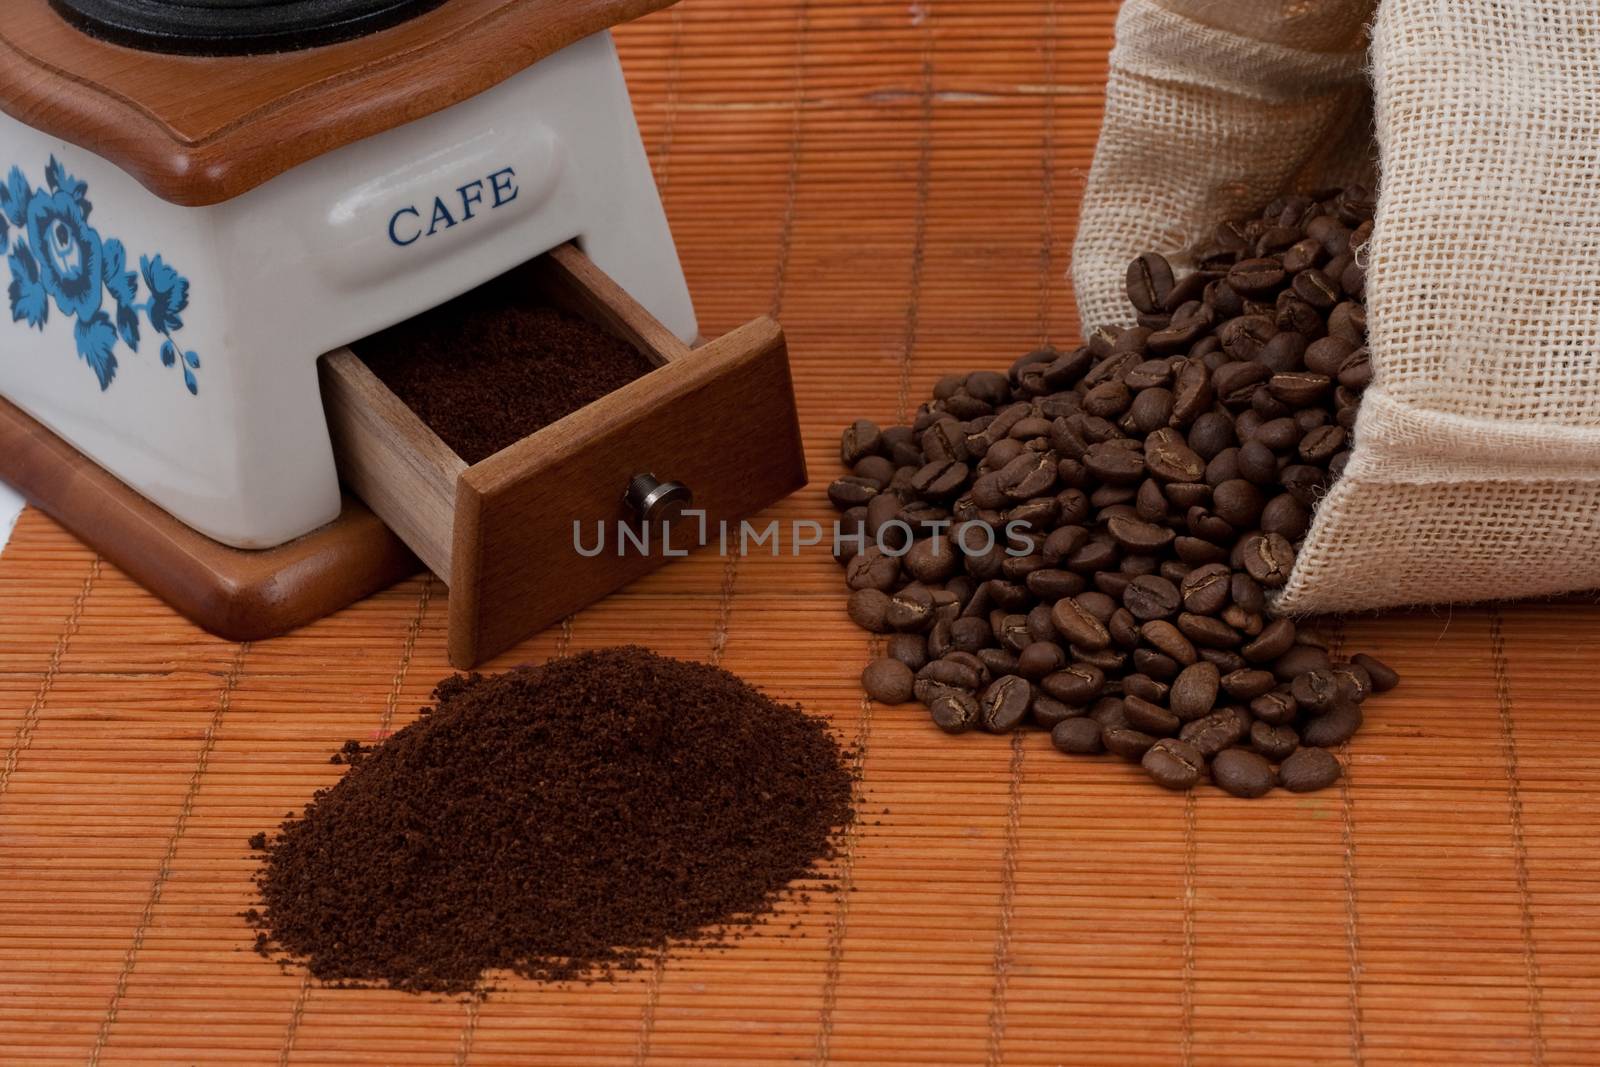 coffee beans from a bag and a grinder